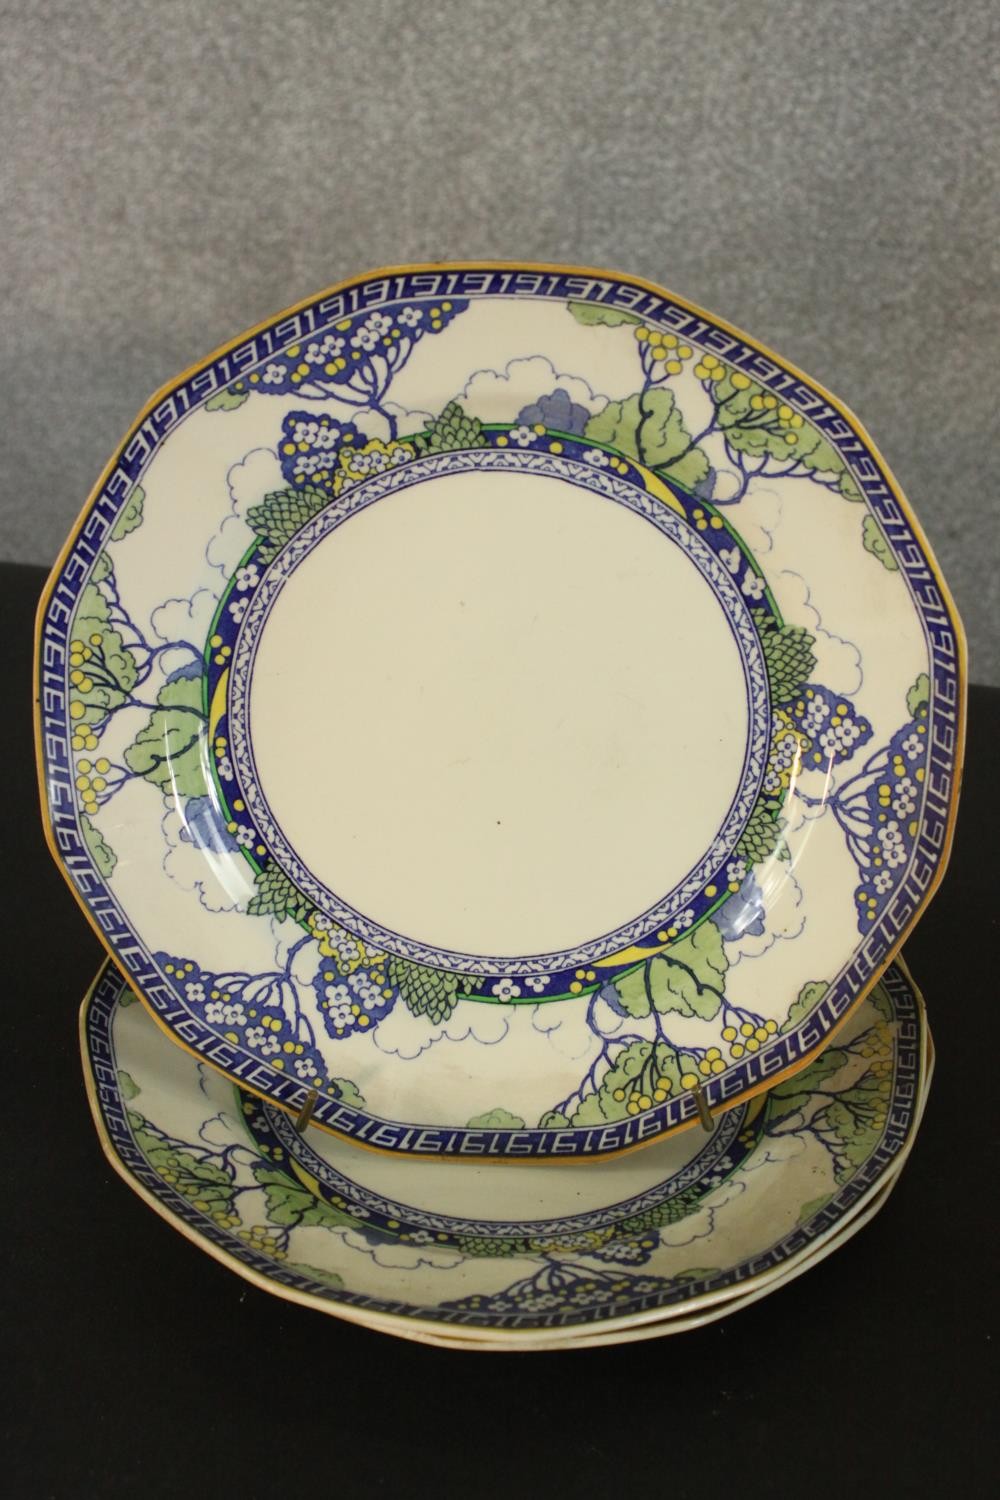 A collection of Royal Doulton Merryweather plates and bowls, along with a 19th century green glaze - Image 3 of 14